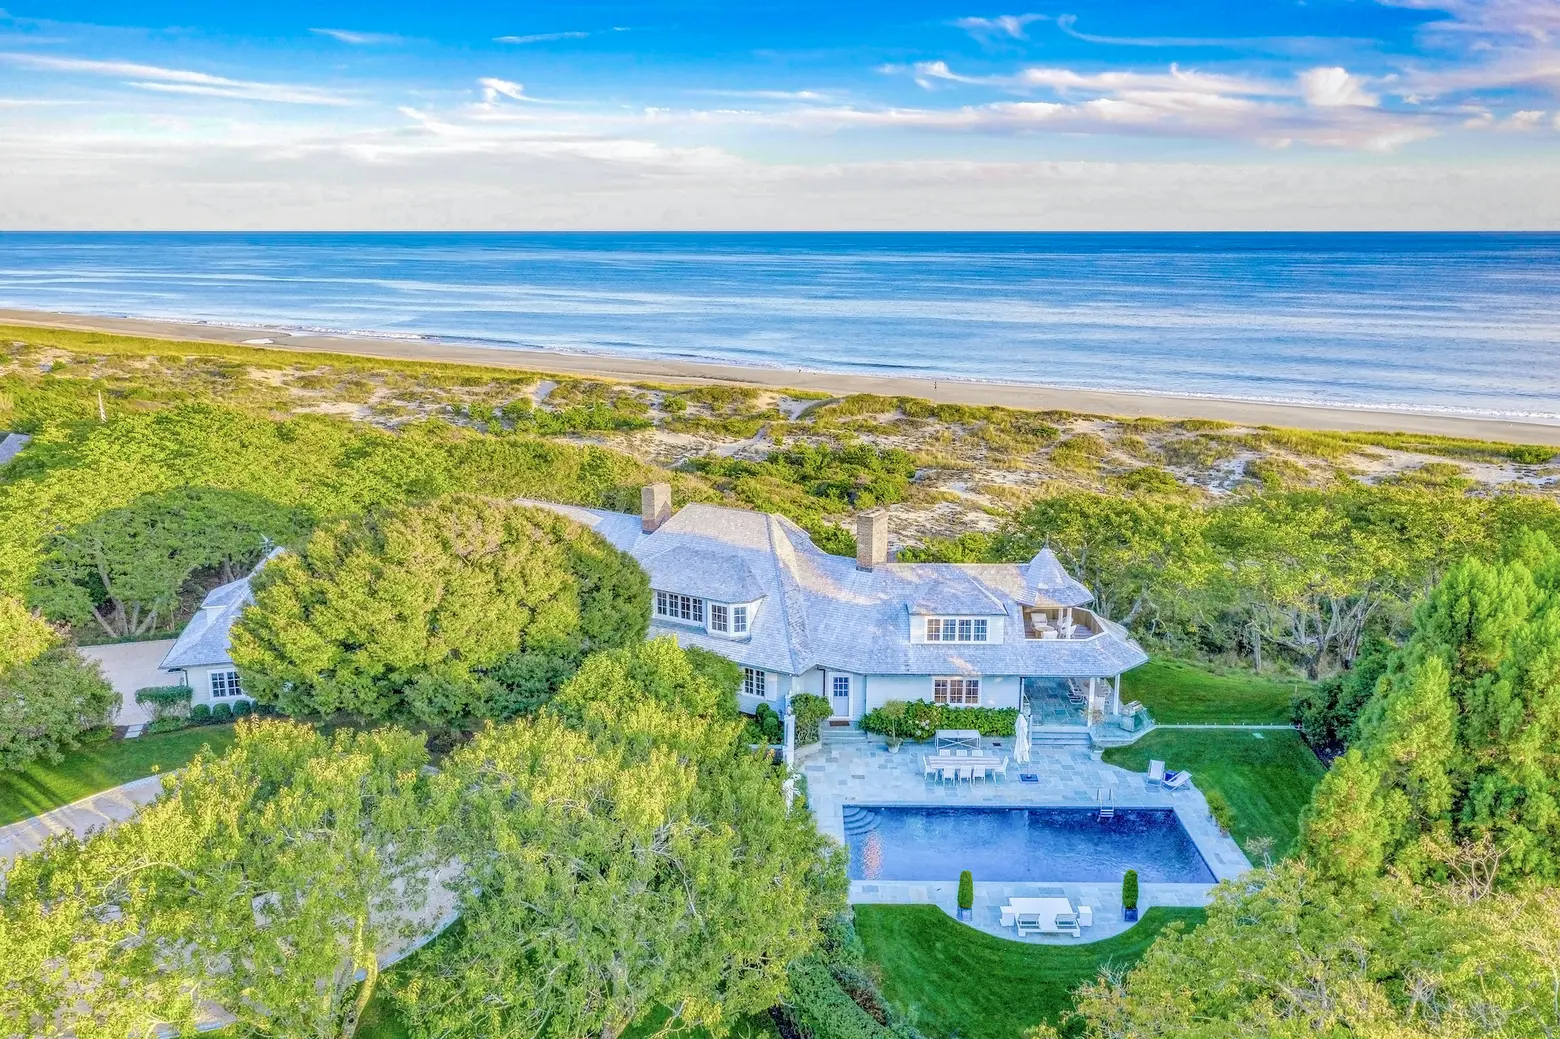 $45M oceanfront estate is the priciest sale in the Hamptons since 2016